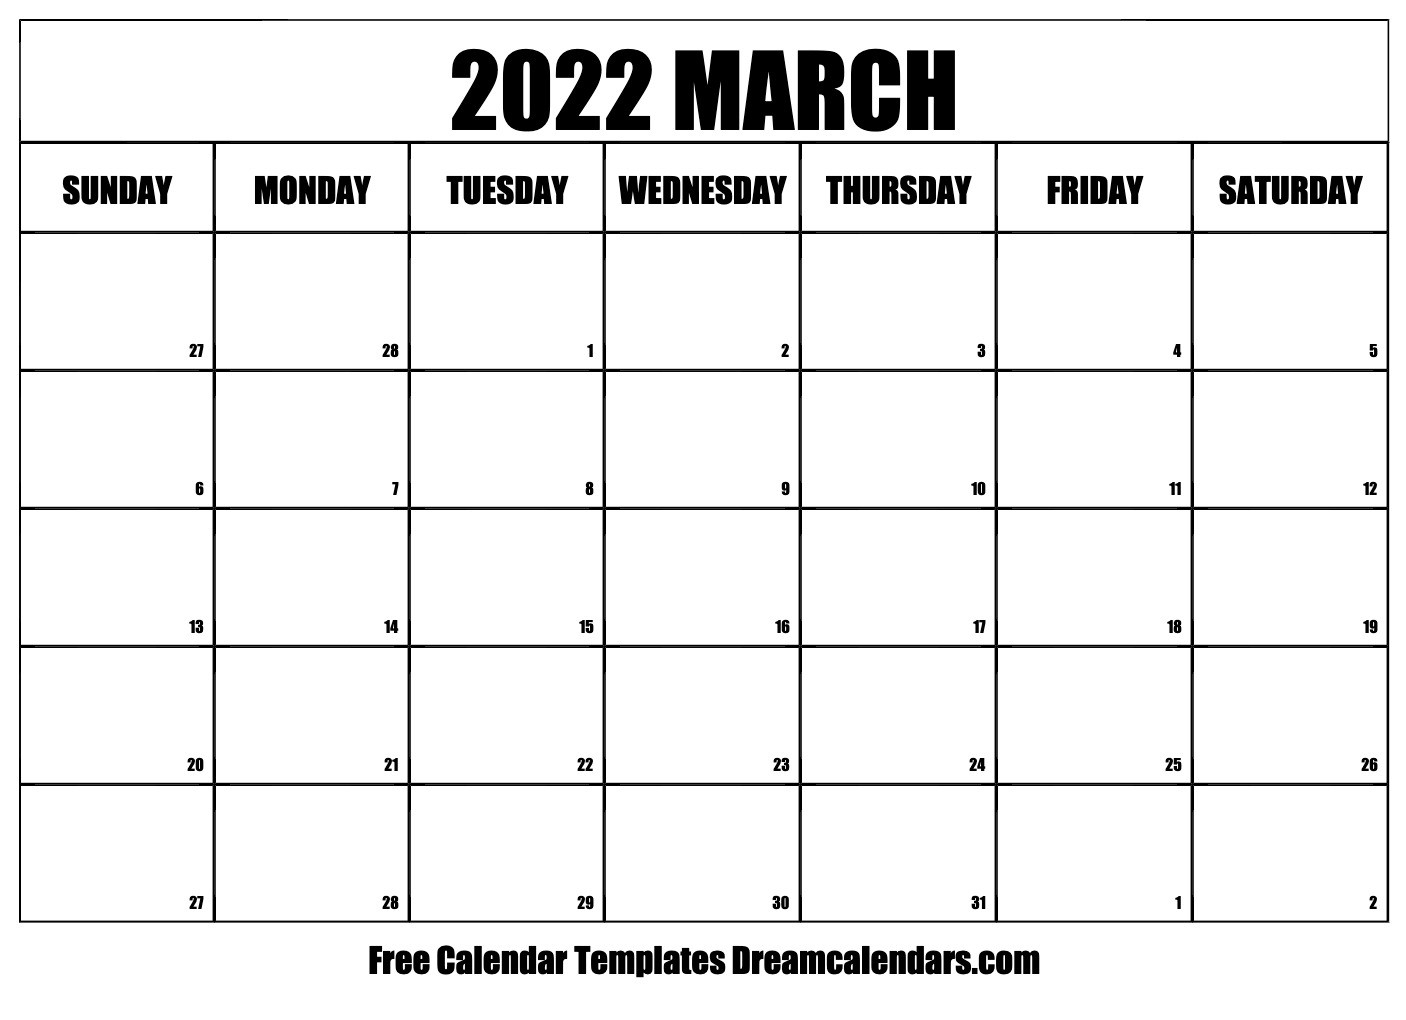 Free Calendar Template 2022 March  Free Printable Lined Monthly Calendar 2022